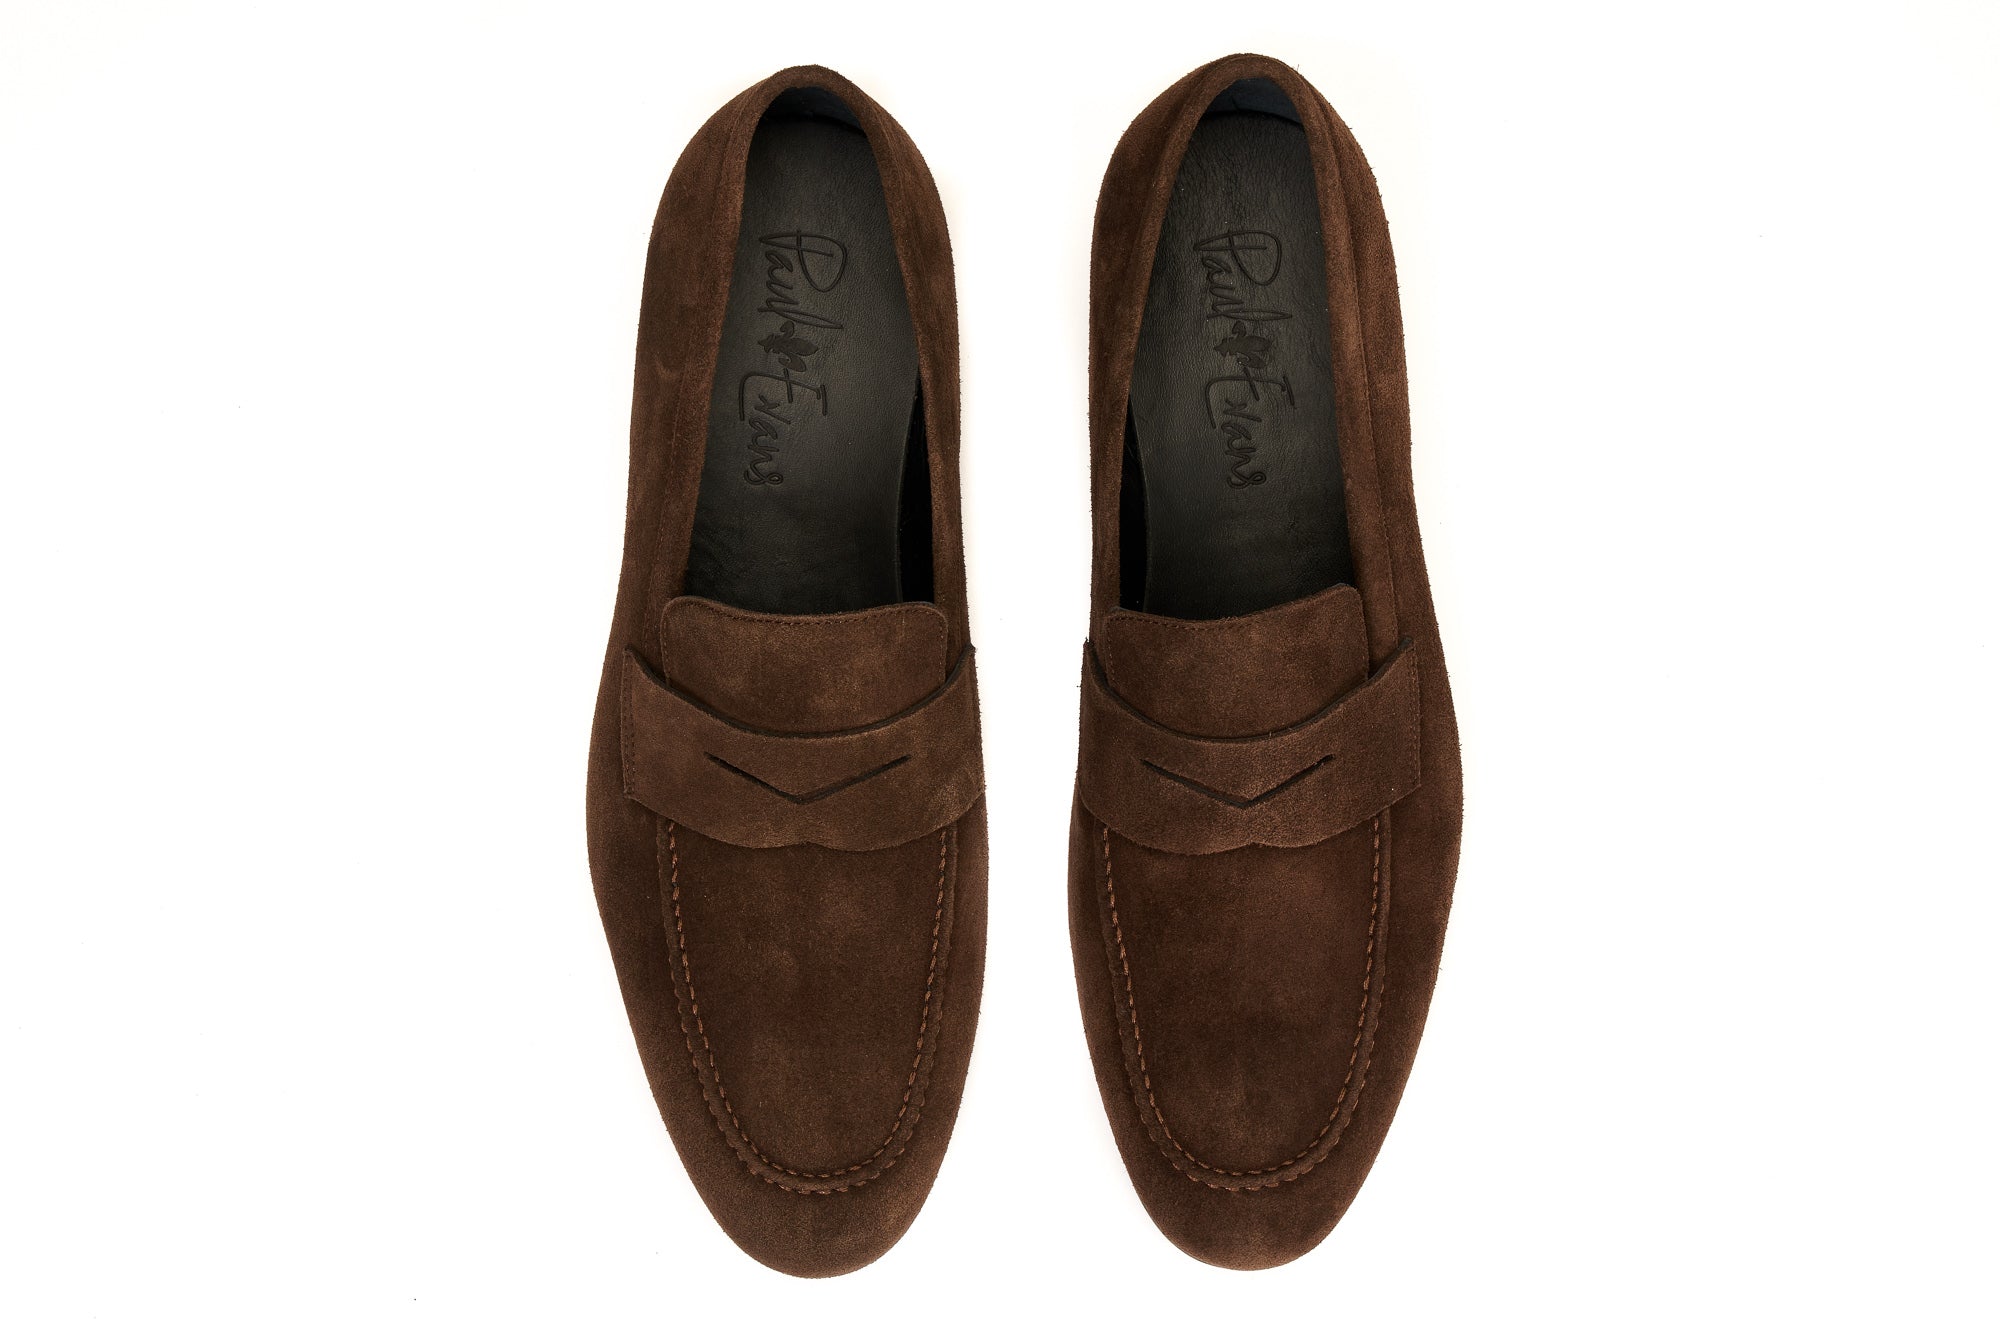 The Edward Penny Loafer - Dark Brown Suede